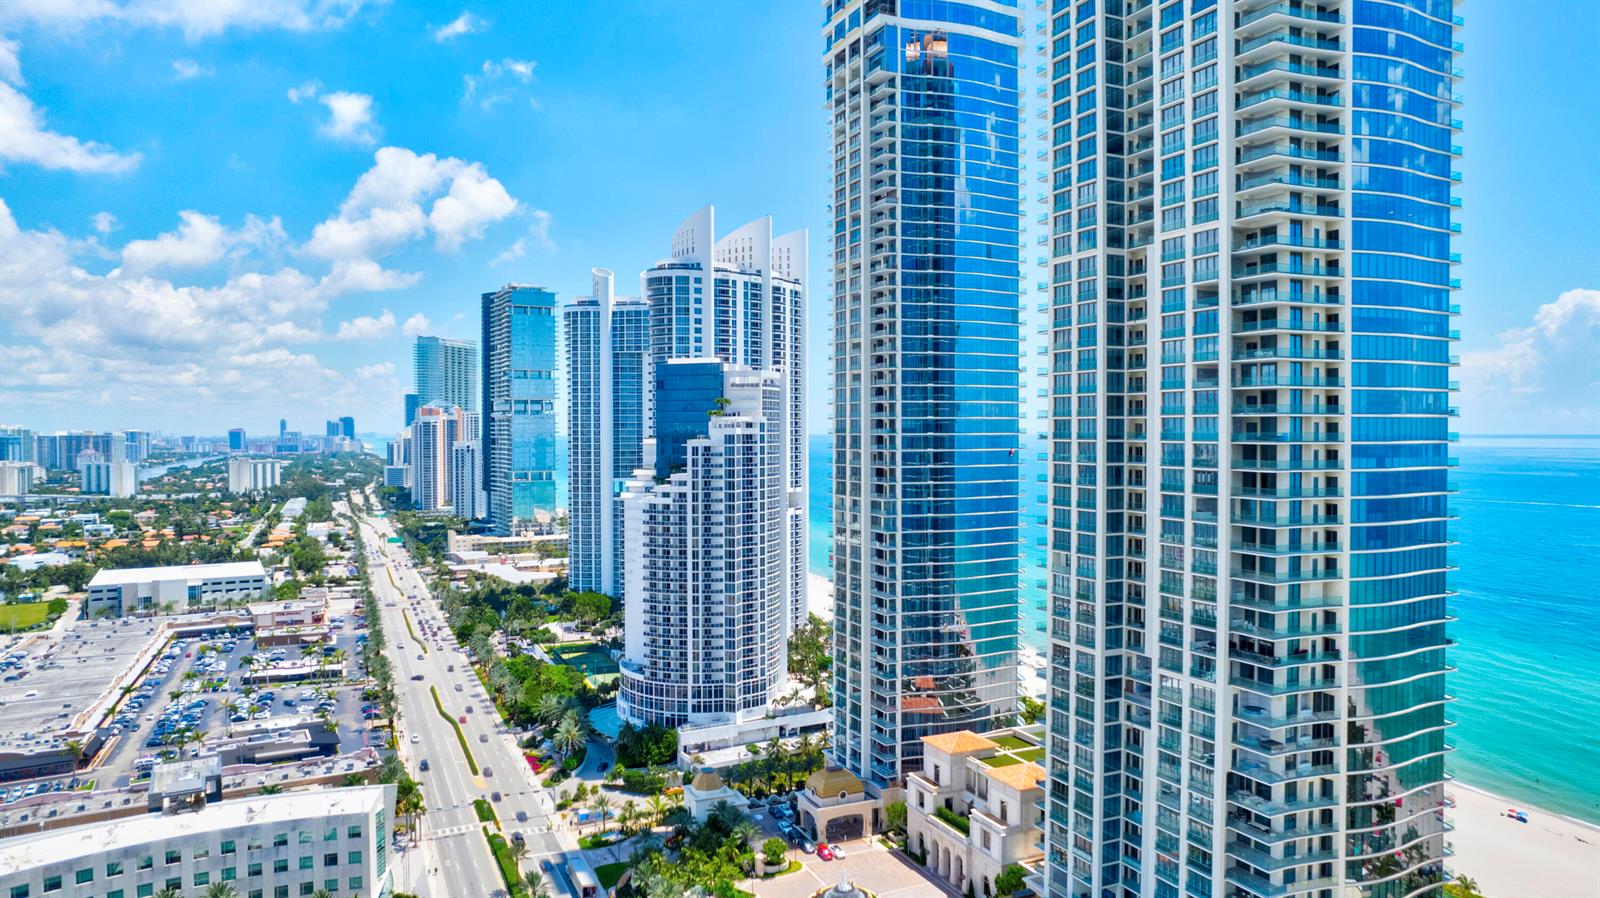 Frequently Asked Questions about Buying Pre-Construction and New Construction Condos in Miami